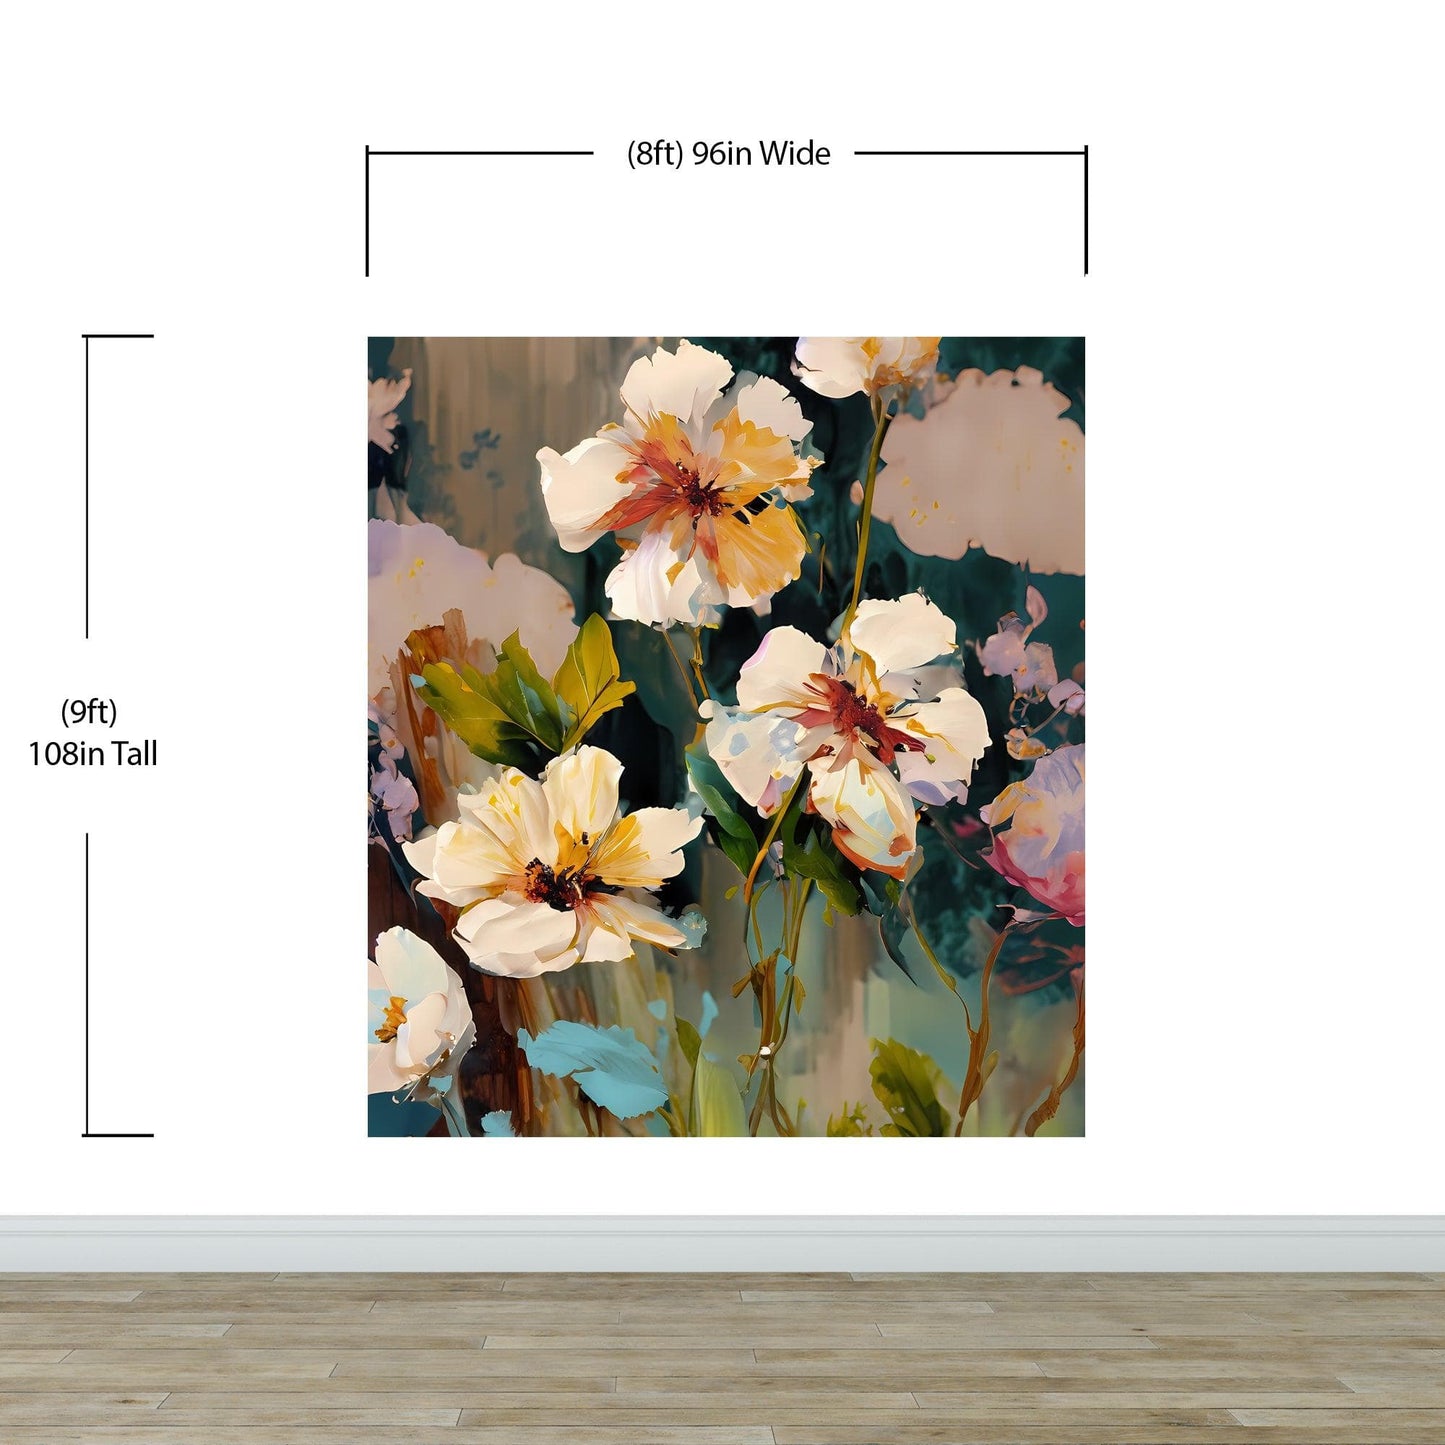 Flower Blossoms Wallpaper. Floral Oil Painting Peel and Stick Wall Mural. #6664